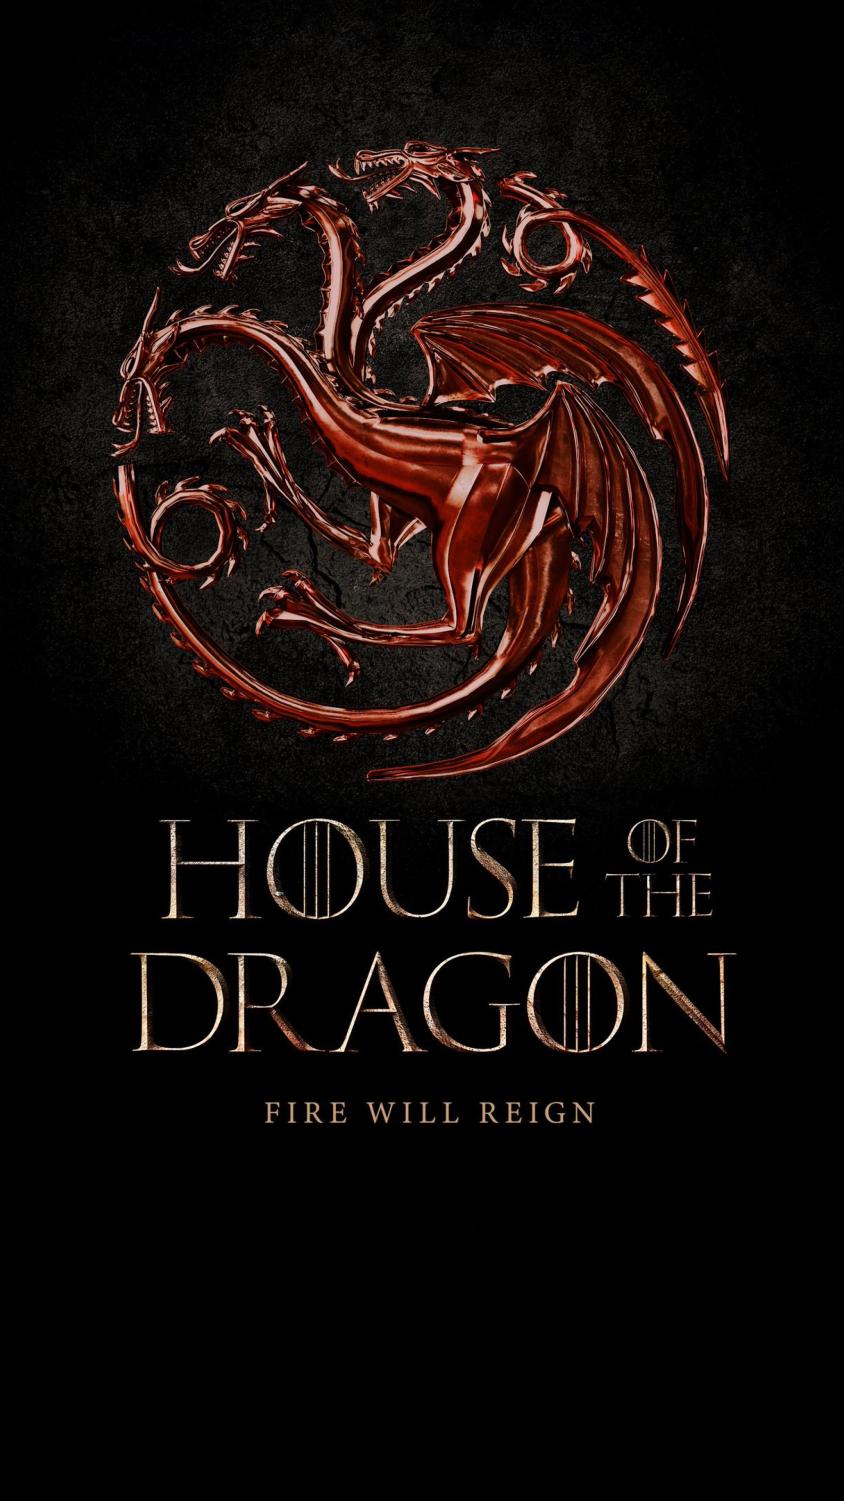 House of the Dragon and Rings of Power are coming: What's at stake